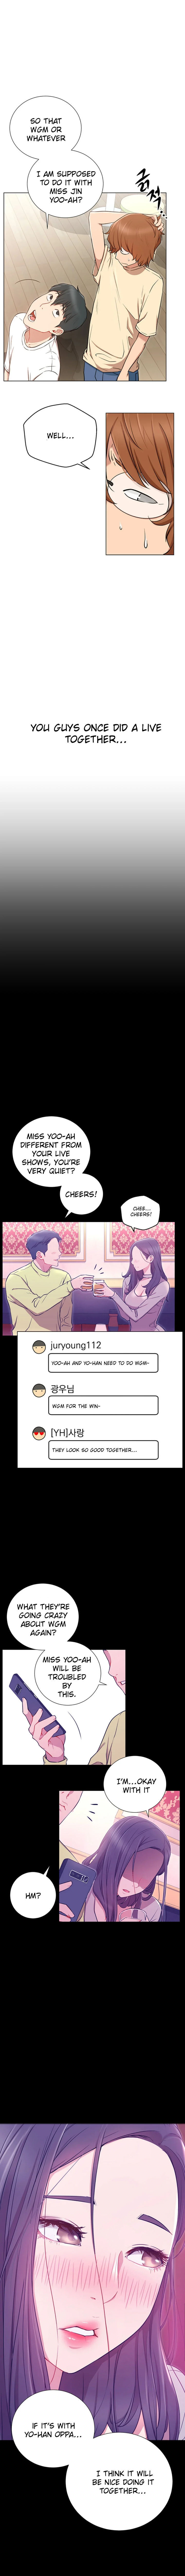 do-you-want-to-collab-chap-7-6